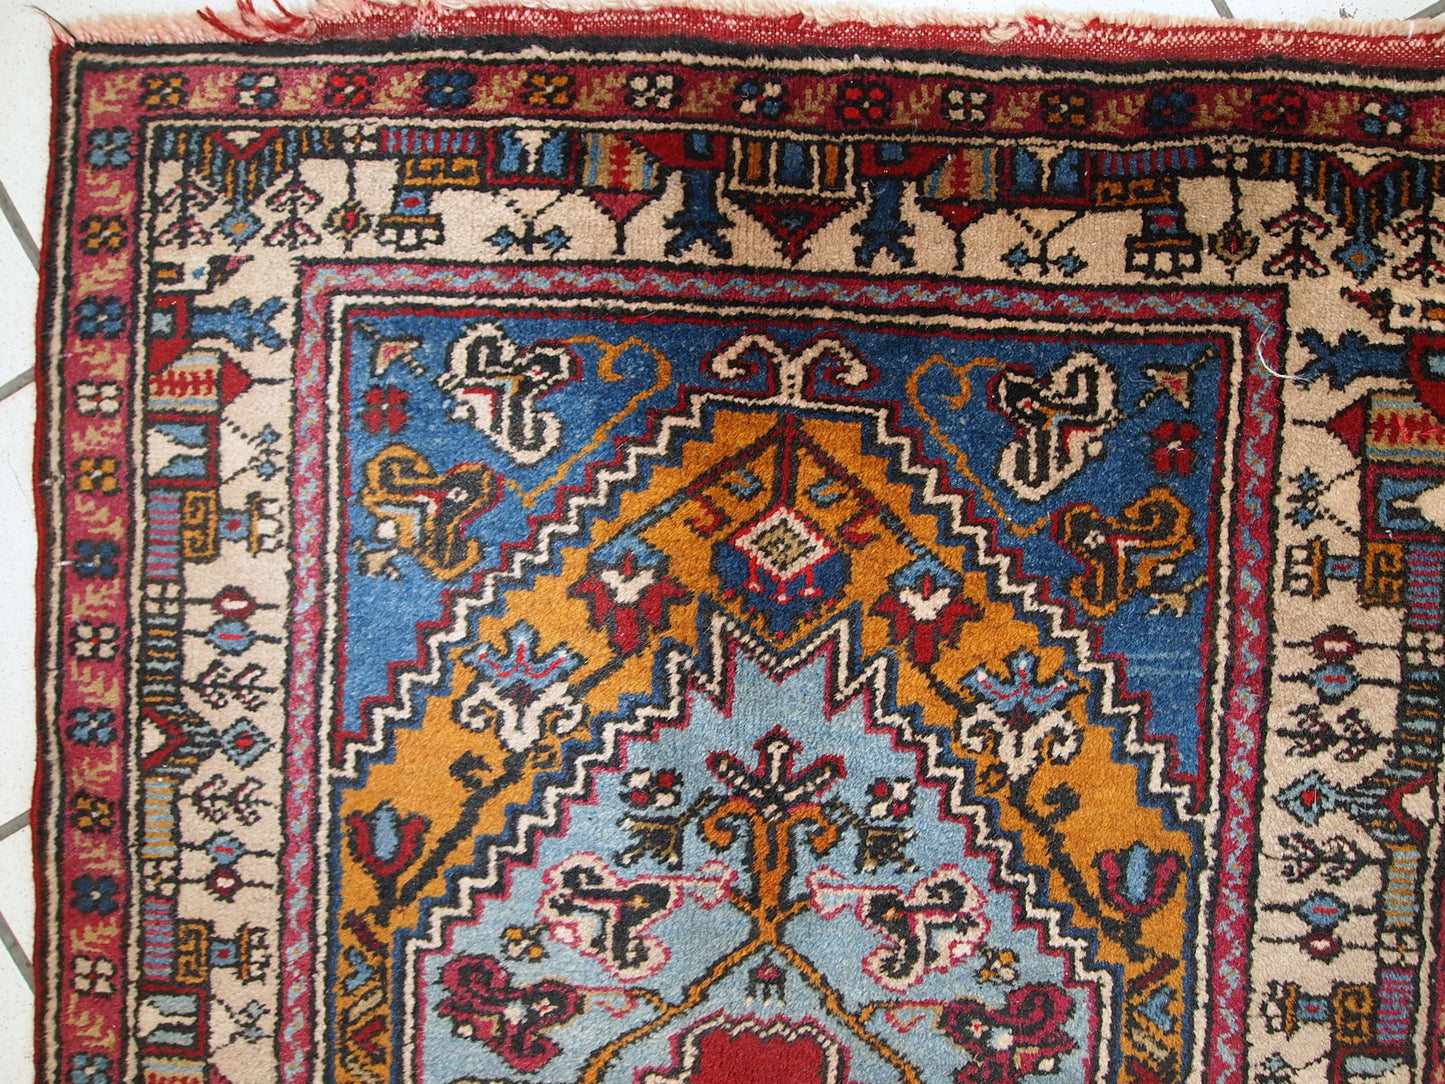 This vintage prayer Turkish rug made in colorful shades of wool. The rug is quite thick and soft. Beautiful beige border with colorful houses on it. The rug is in original good condition.